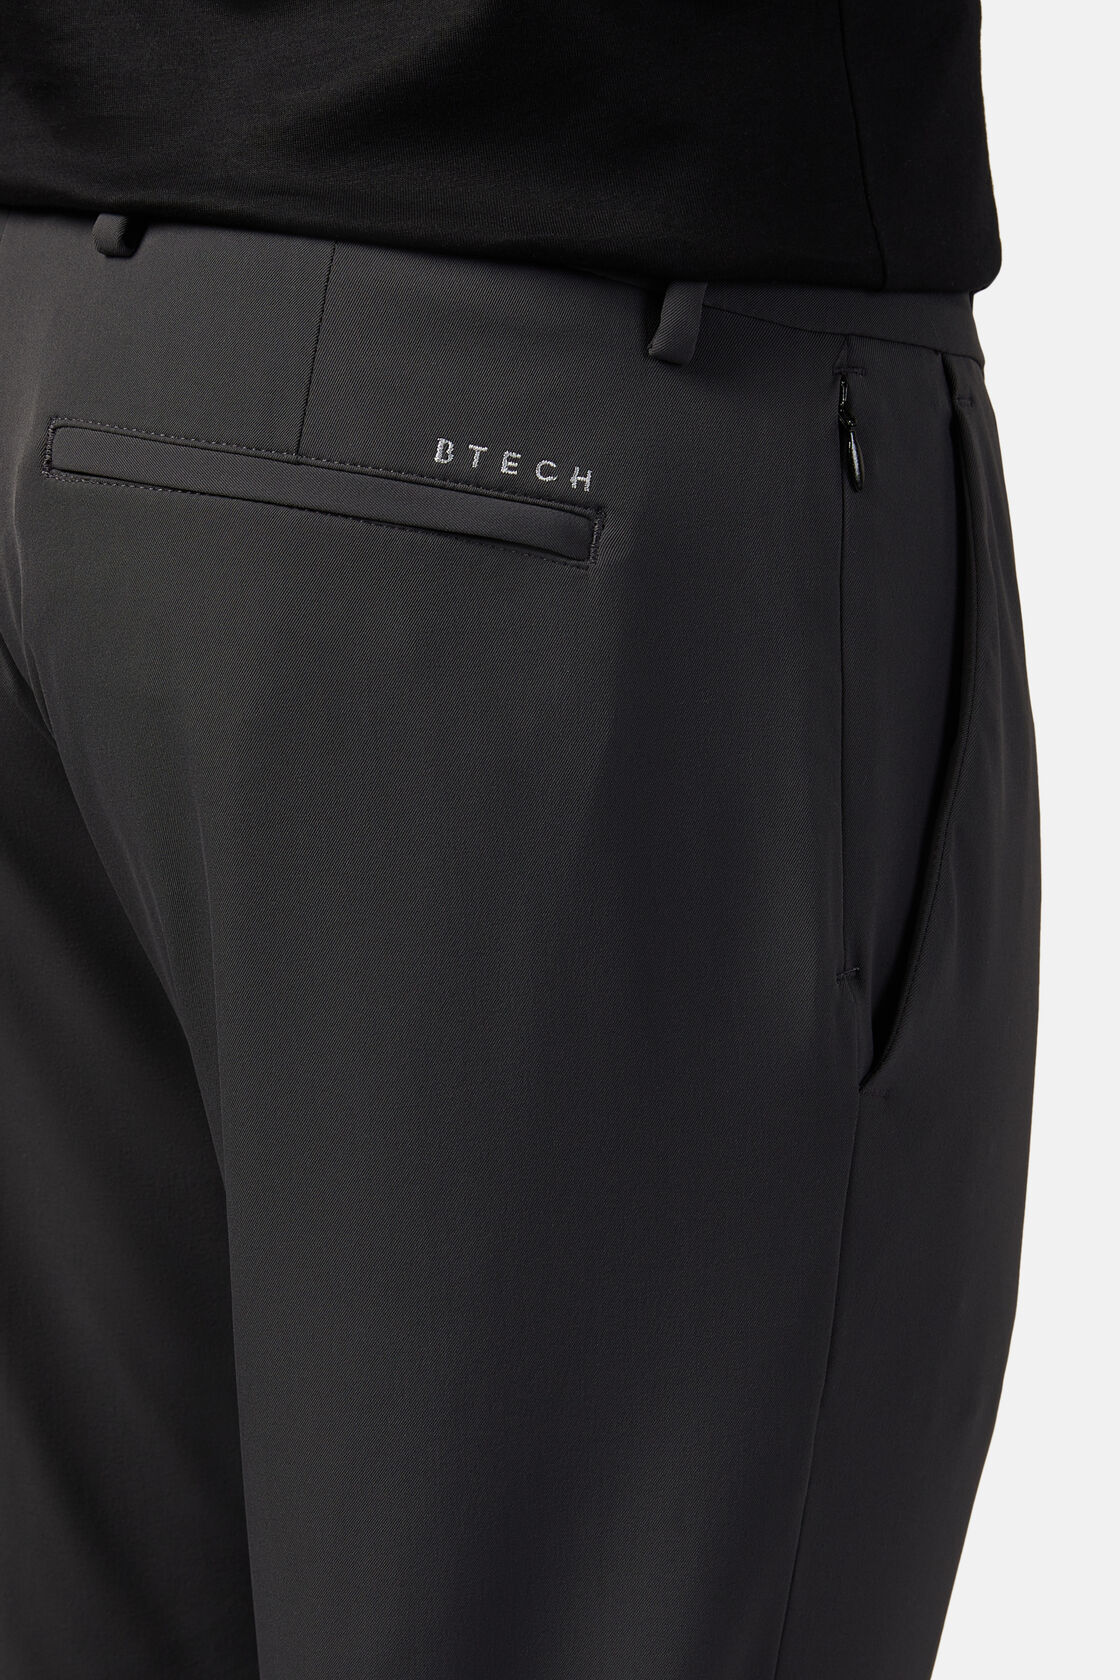 BTech Performance Stretch Nylon Trousers, Charcoal, hi-res